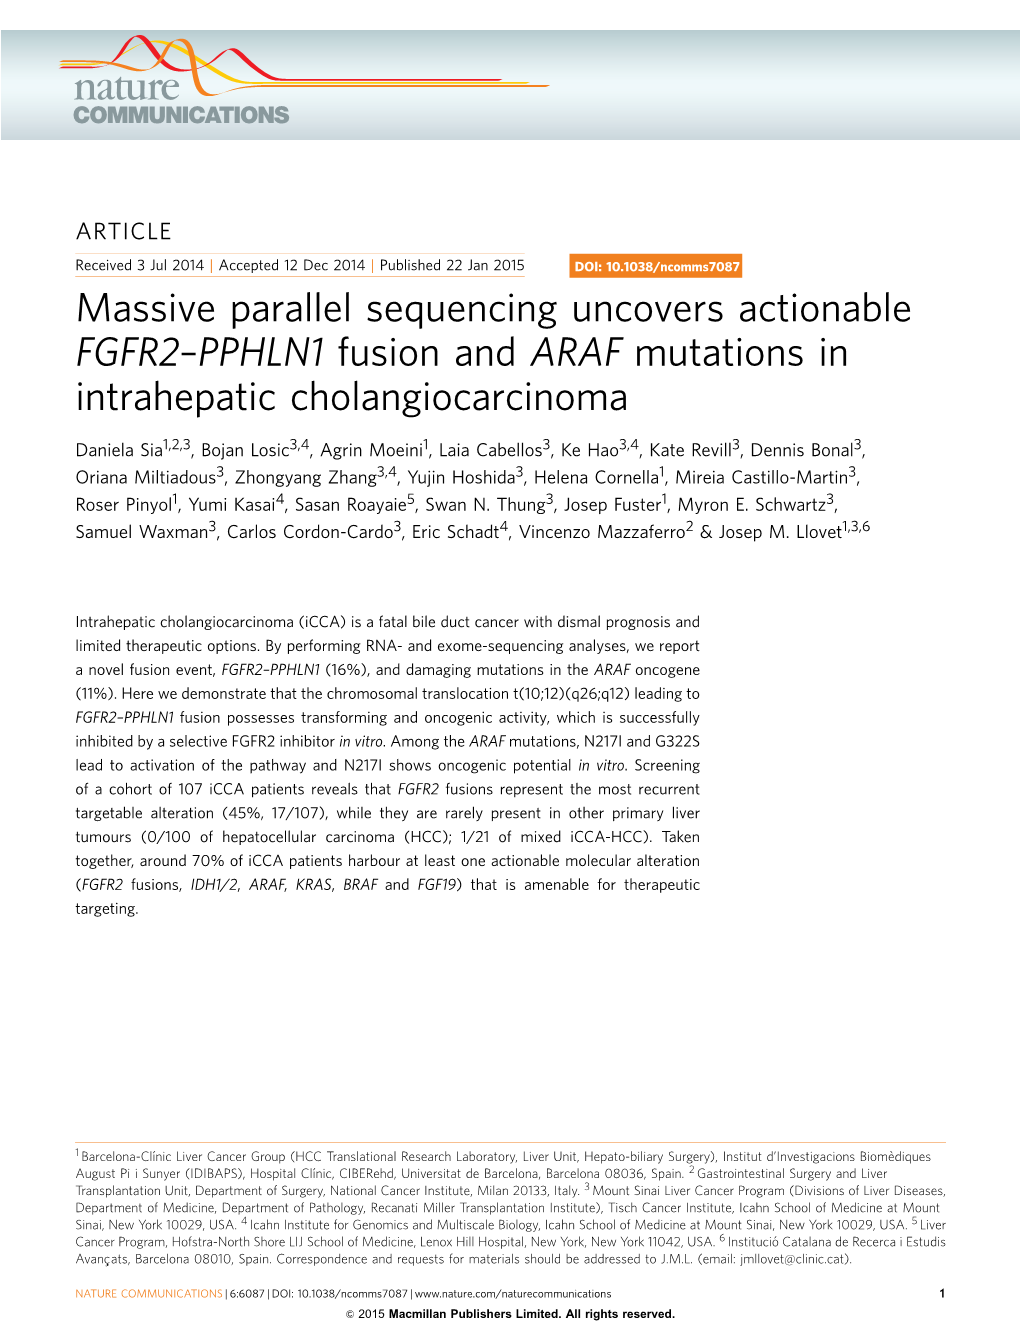 PPHLN1 Fusion and ARAF Mutations in Intrahepatic Cholangiocarcinoma